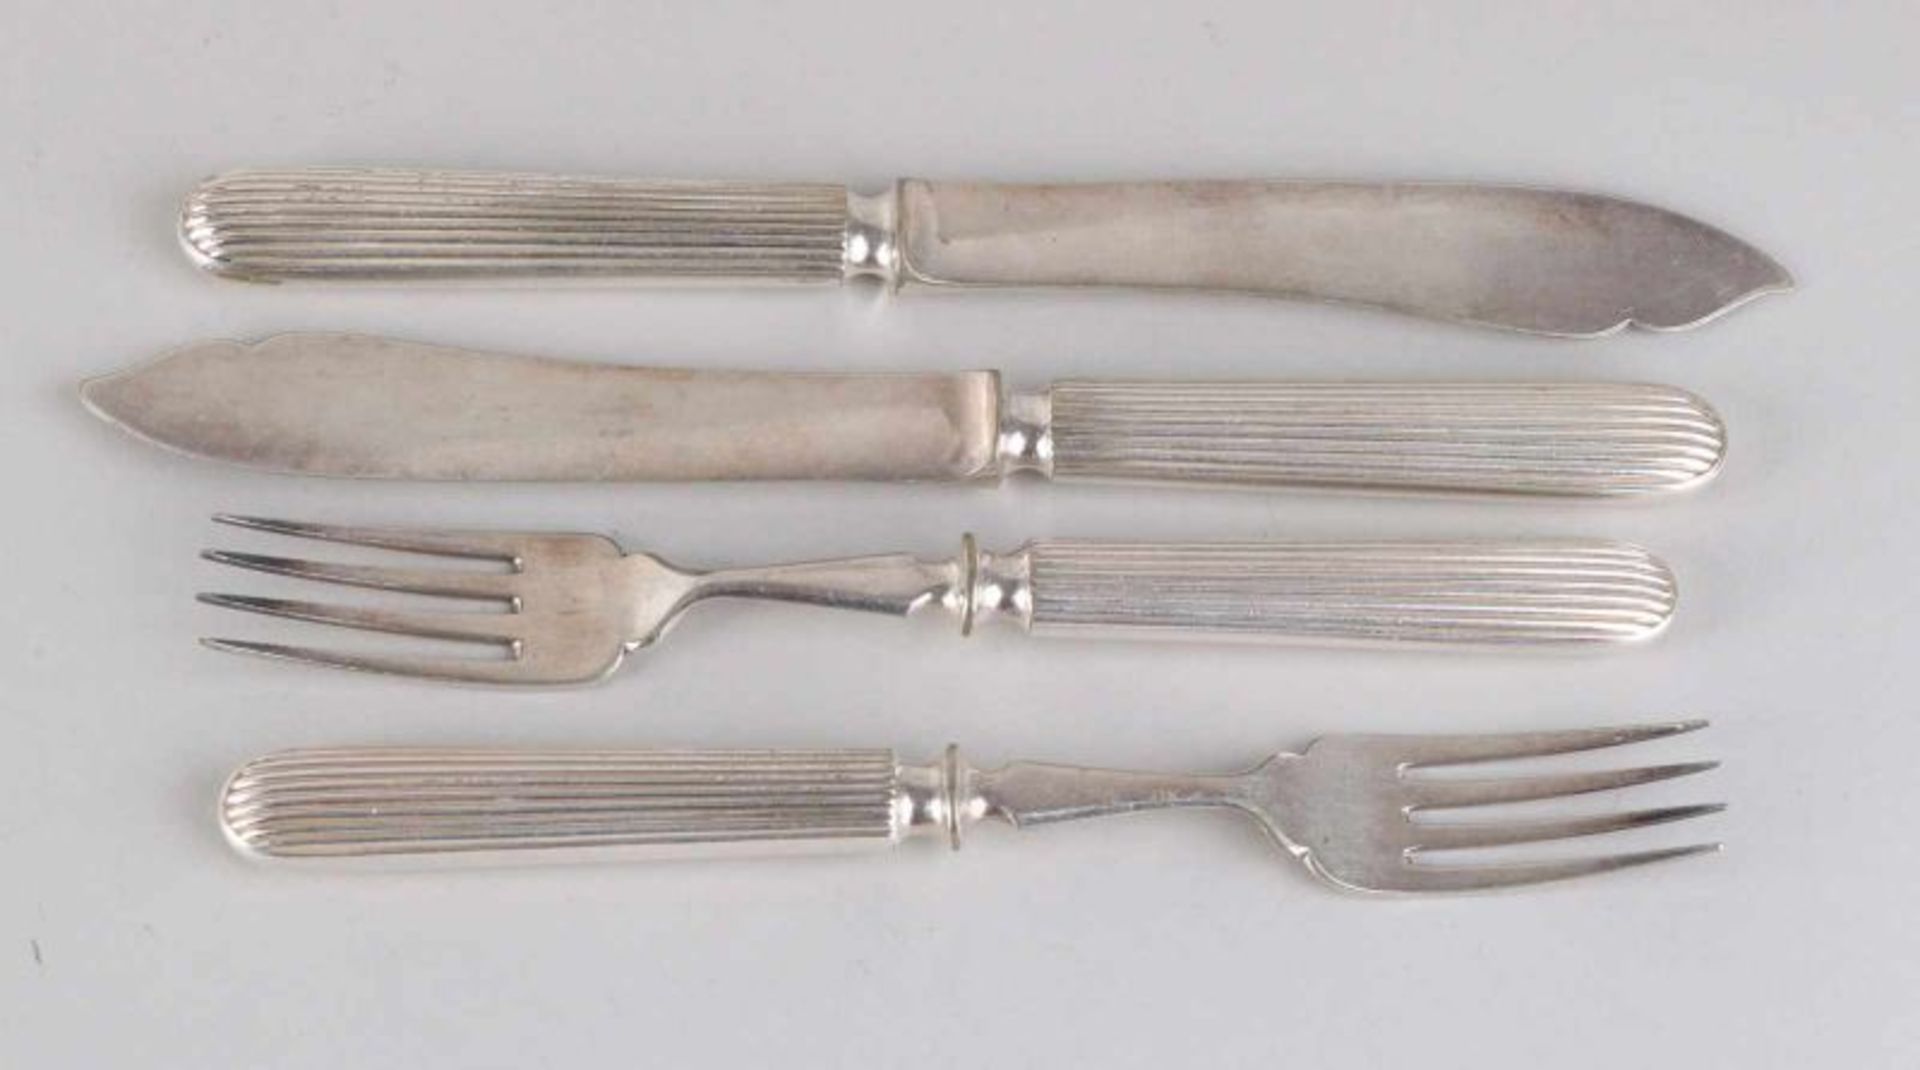 Two fish cutlery sets, with 2 knives and forks, plated with a handle with ribbing. 20 cm. In